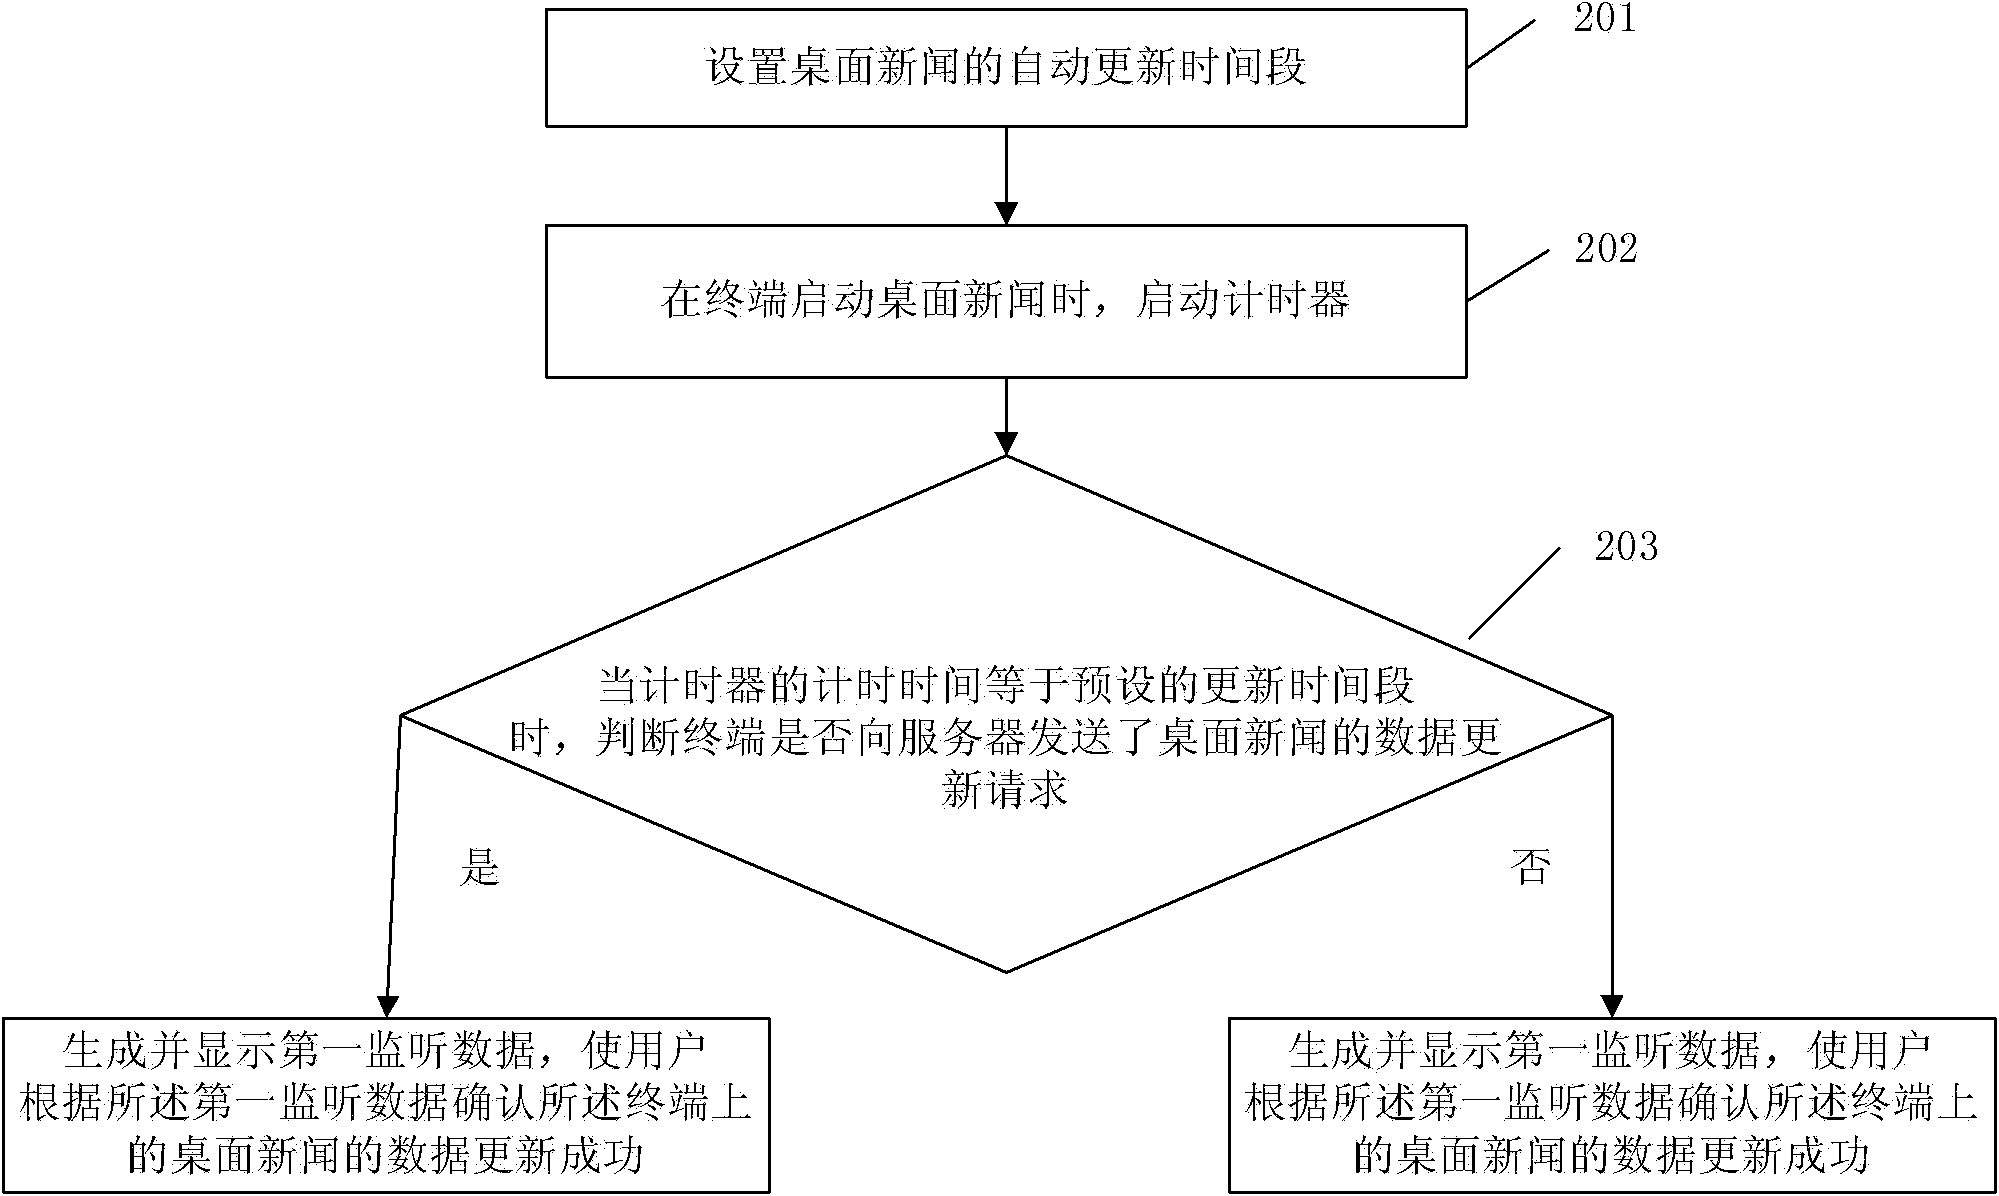 Method and device to detect for updating